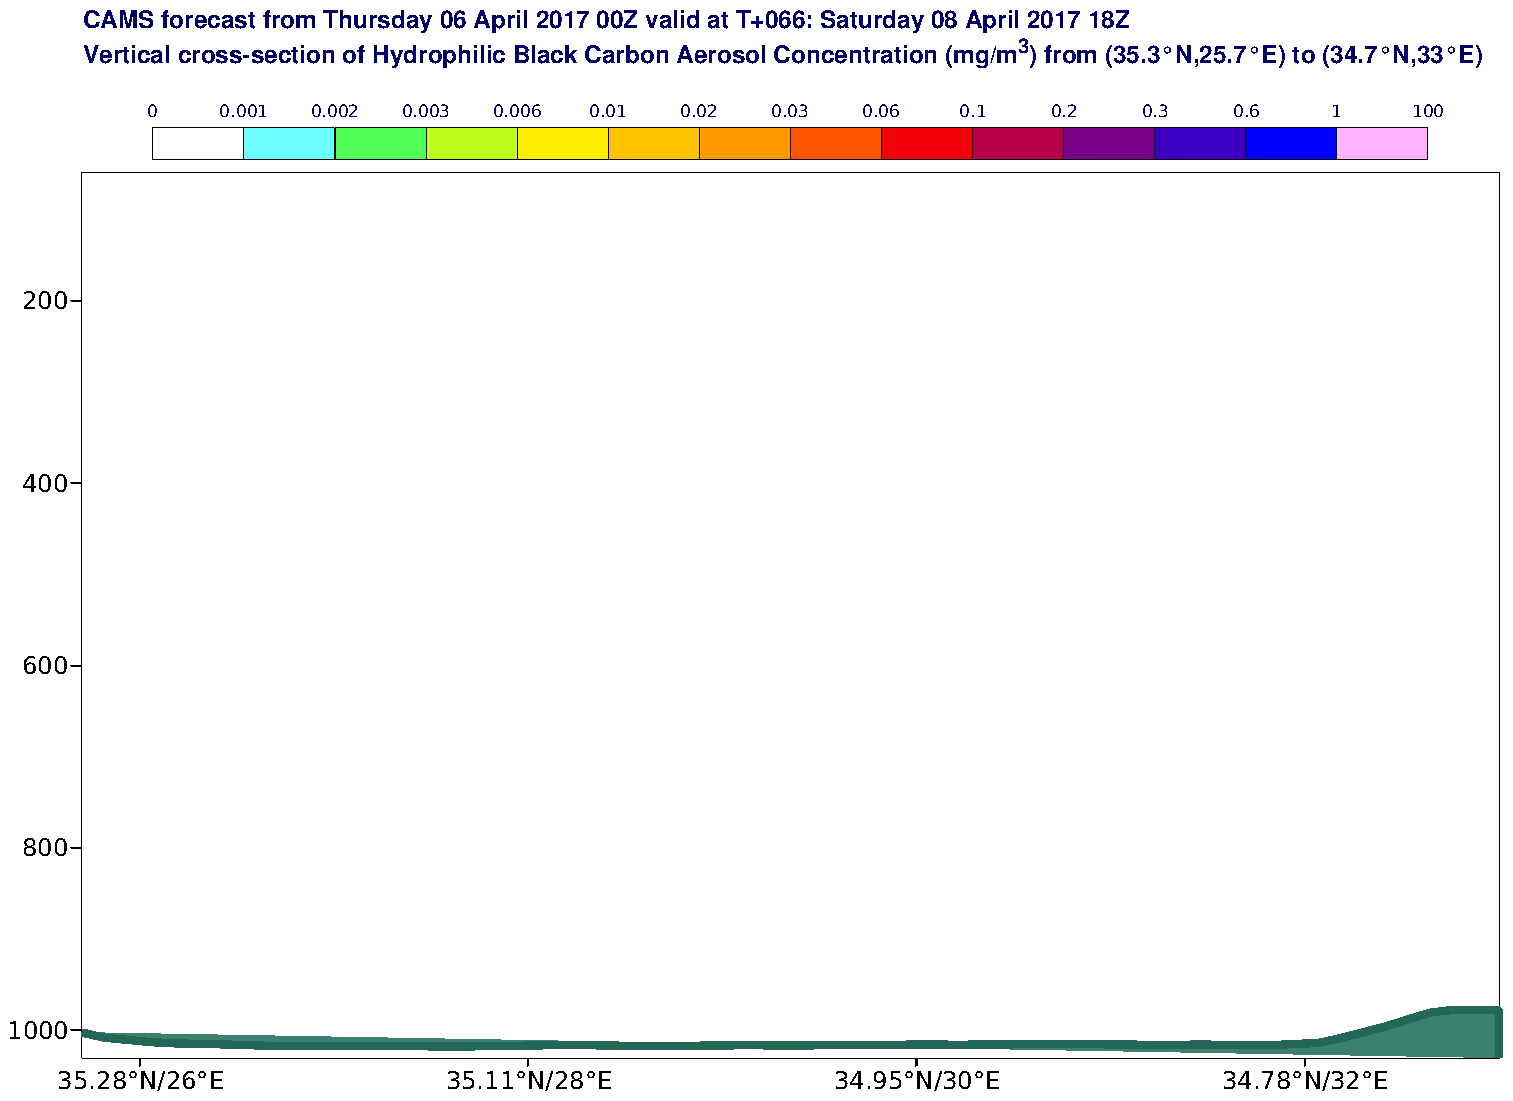 Vertical cross-section of Hydrophilic Black Carbon Aerosol Concentration (mg/m3) valid at T66 - 2017-04-08 18:00